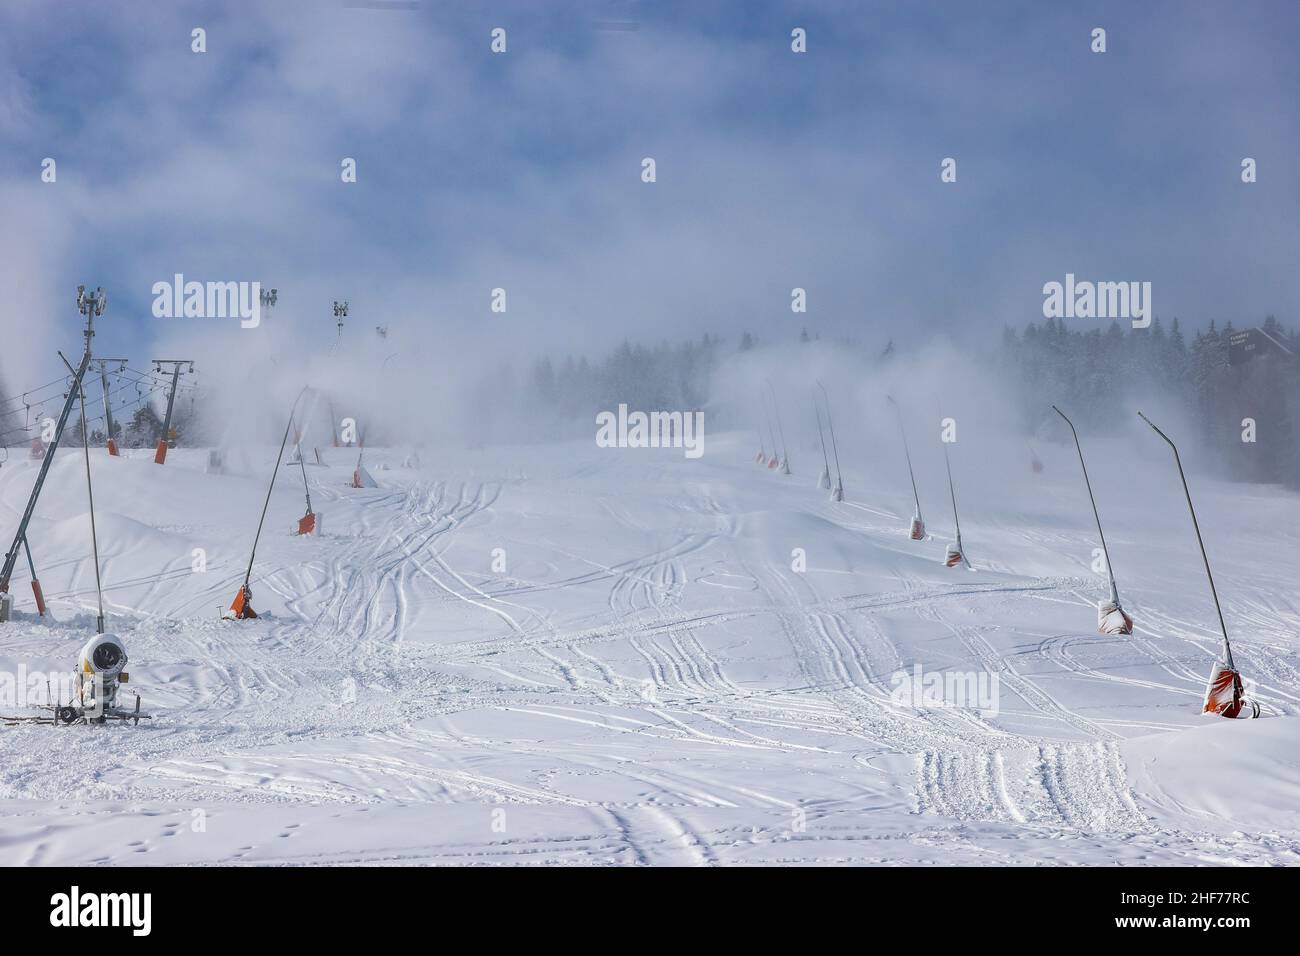 12 January 2022, Saxony, Oberwiesenthal: From numerous lances, the slope at the long drag lift is covered with snow. On Saturday, 15.01.2022, this year's ski season will be officially ushered in at Fichtelberg. Due to Corona, the ski area is only open to vaccinated and recovered skiers (2G), and a mask must be worn when queuing at the lift and in the lift itself. The 2G status is checked before purchasing the ski pass as well as in the ski resort. For this purpose, a control point and a central sales point for lift tickets will be set up in the parking lot of the Fichtelberg cable car. Photo: Stock Photo